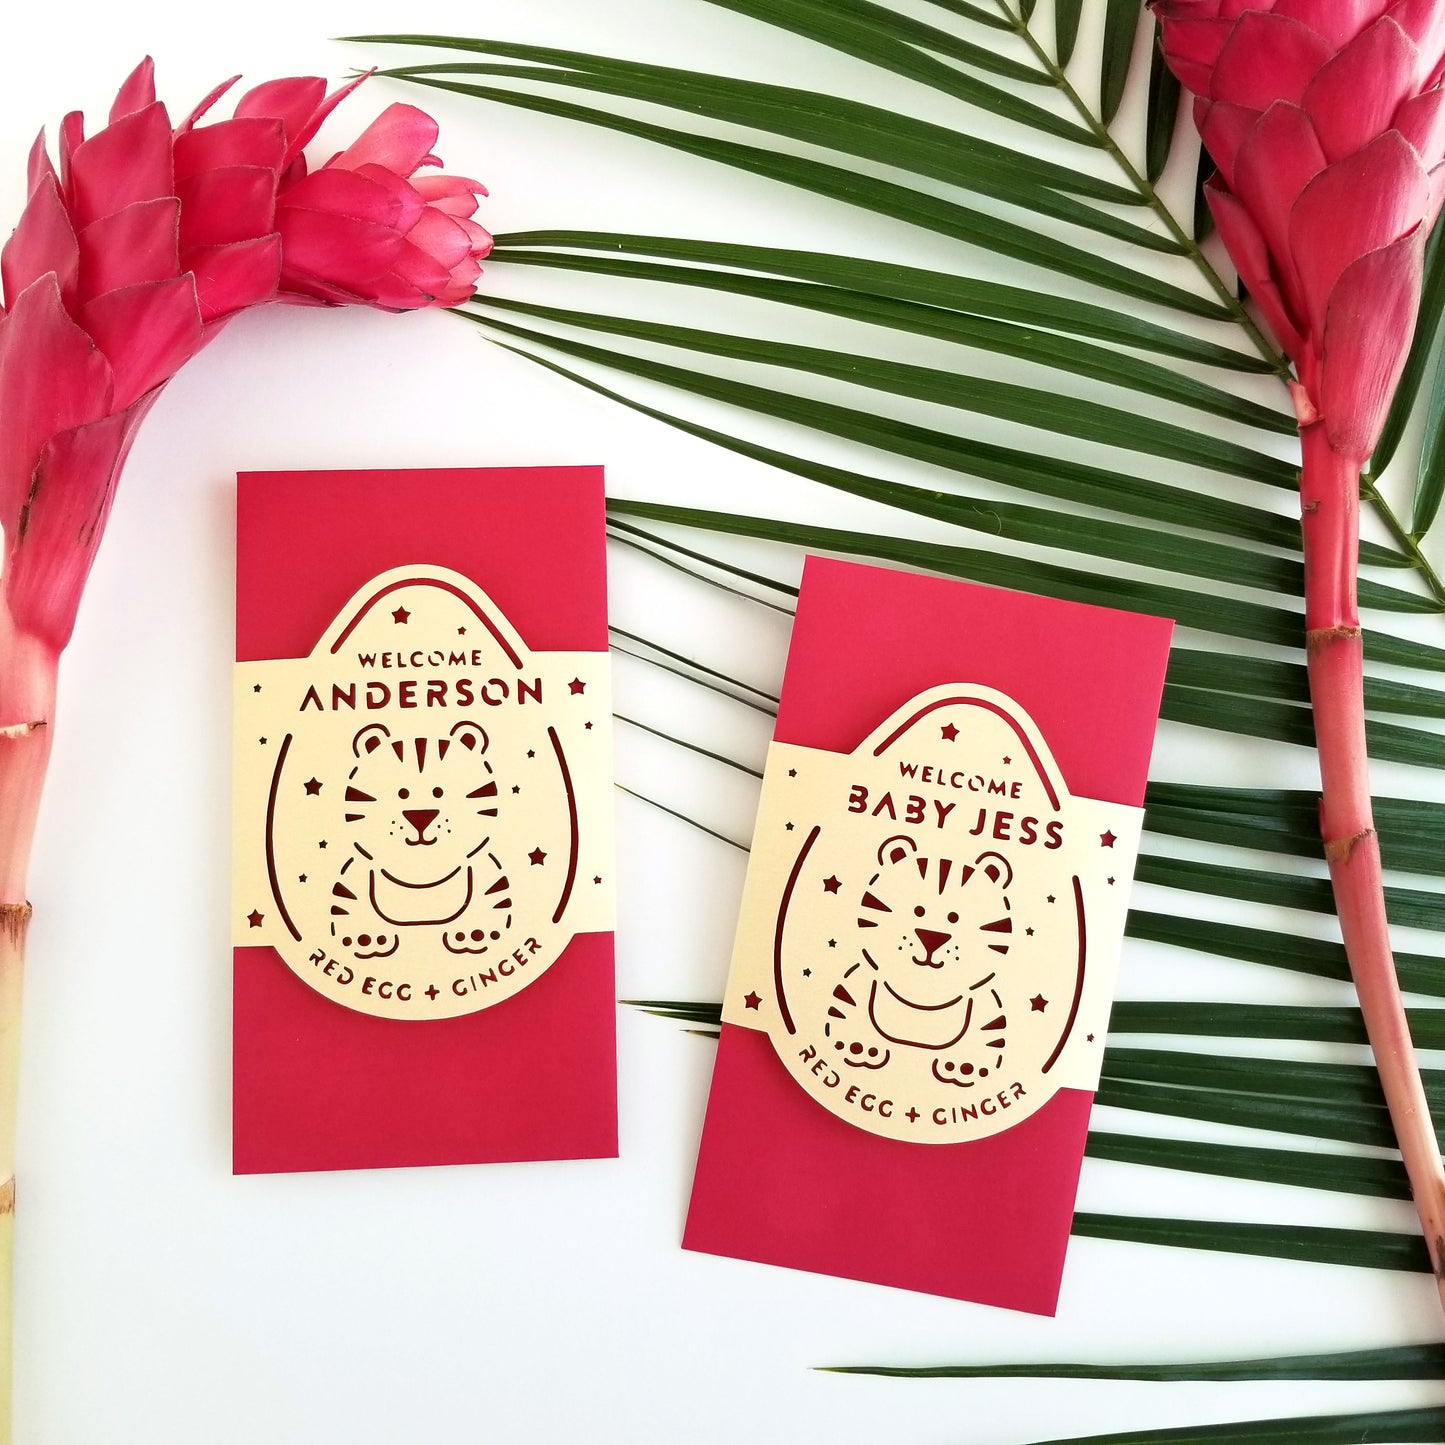 2022 Tiger Red Egg and Ginger Red Envelope, personalized